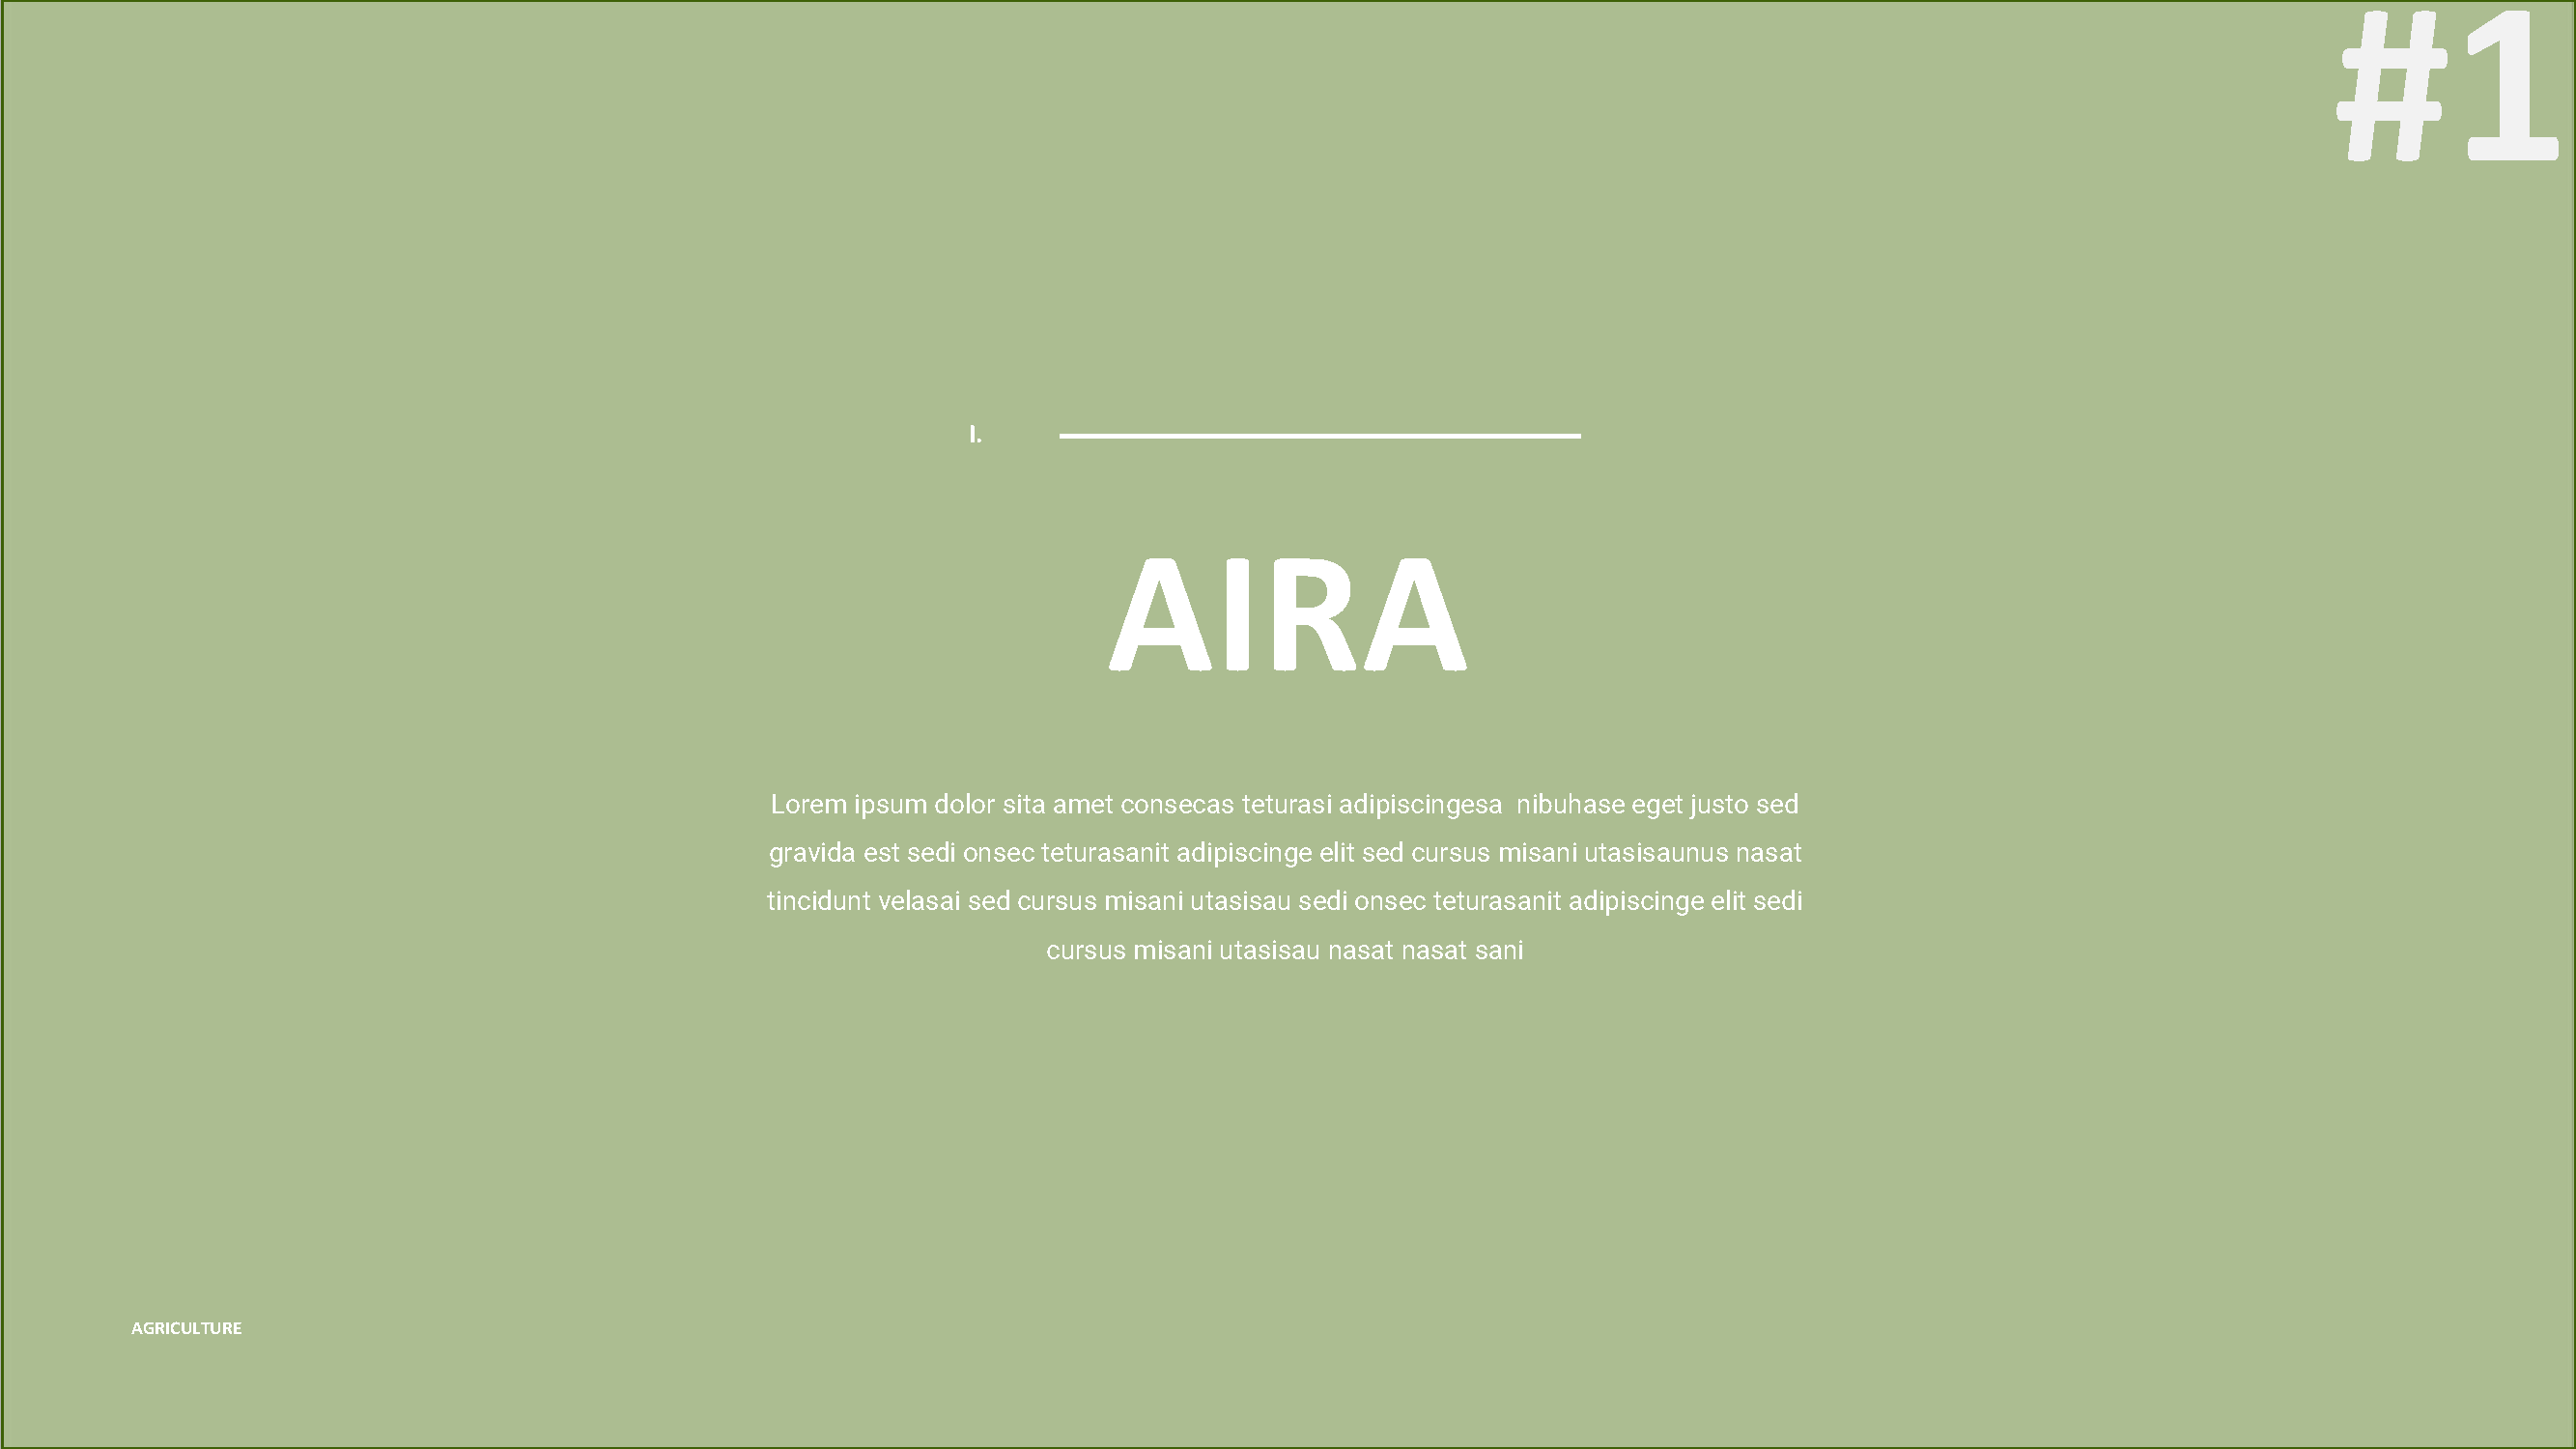 aira-agriculture-presentation-template-GBS43DZ